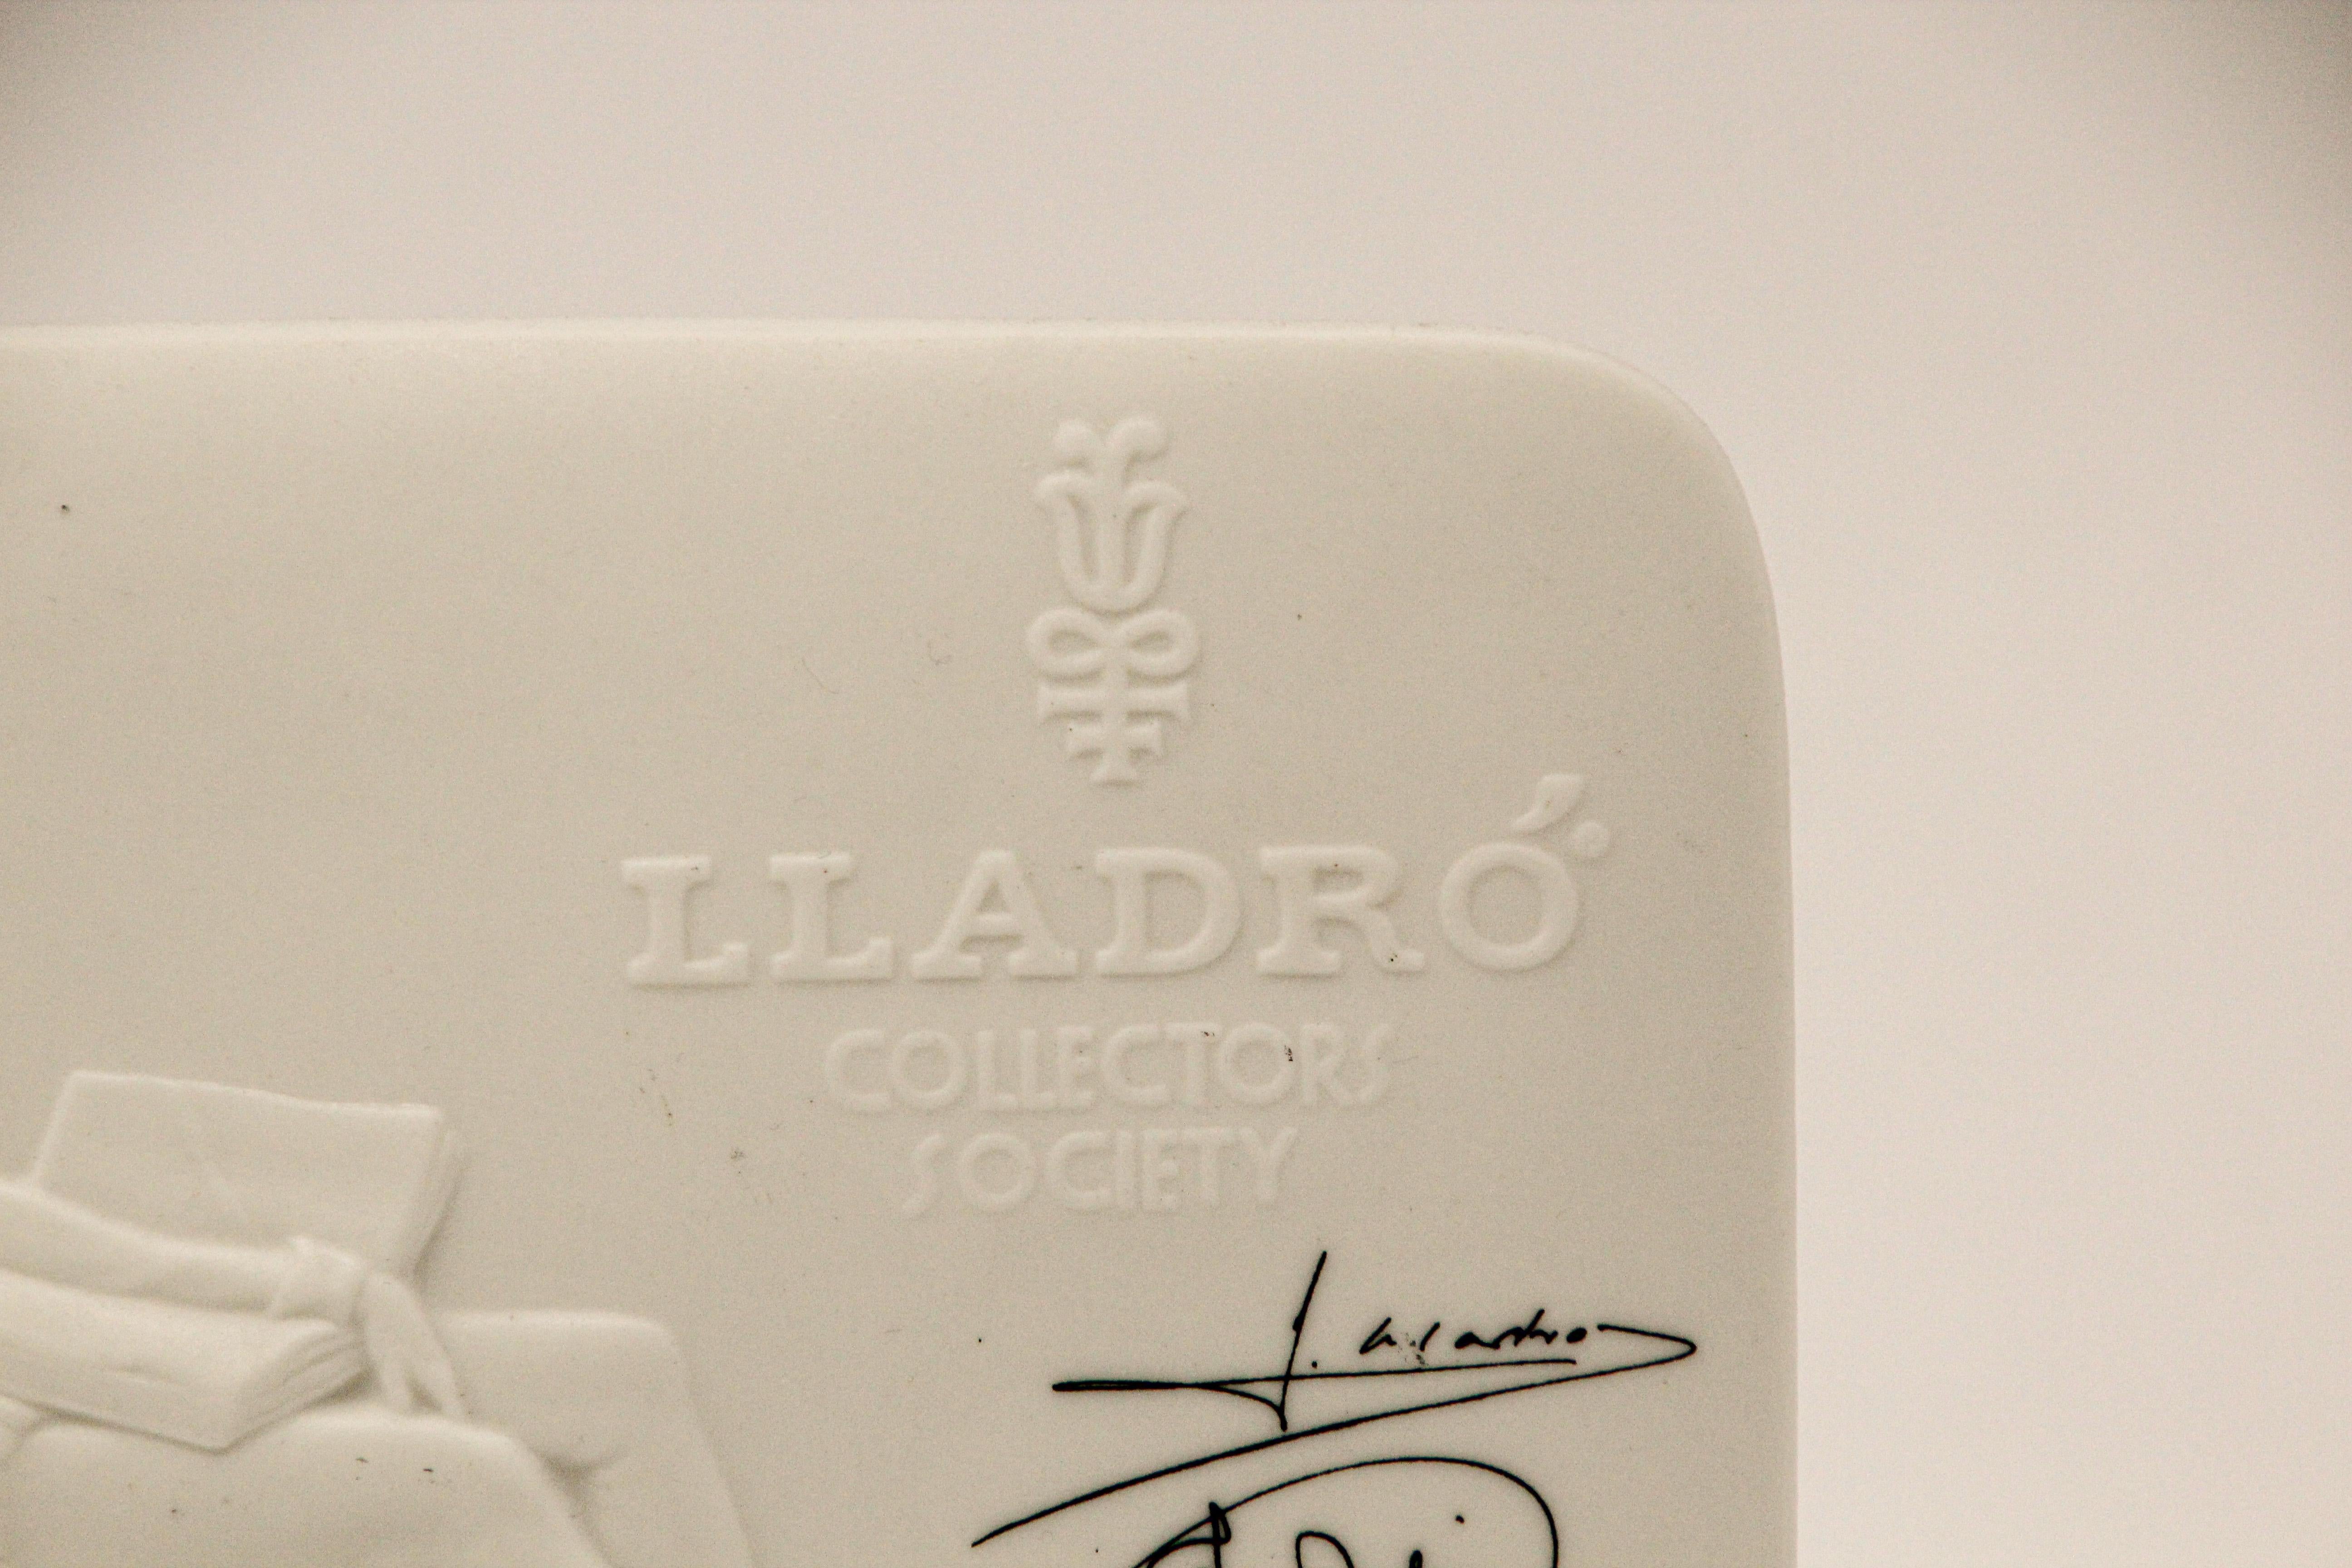 Lladro Collectors Society 1985 Don Quixote porcelain plaque with signatures.
This is a 1985 Lladro Collectors Society display sign, handmade in Spain. It contains the signatures of the three Lladro brothers Juan, Jose and Vicente, alongside the